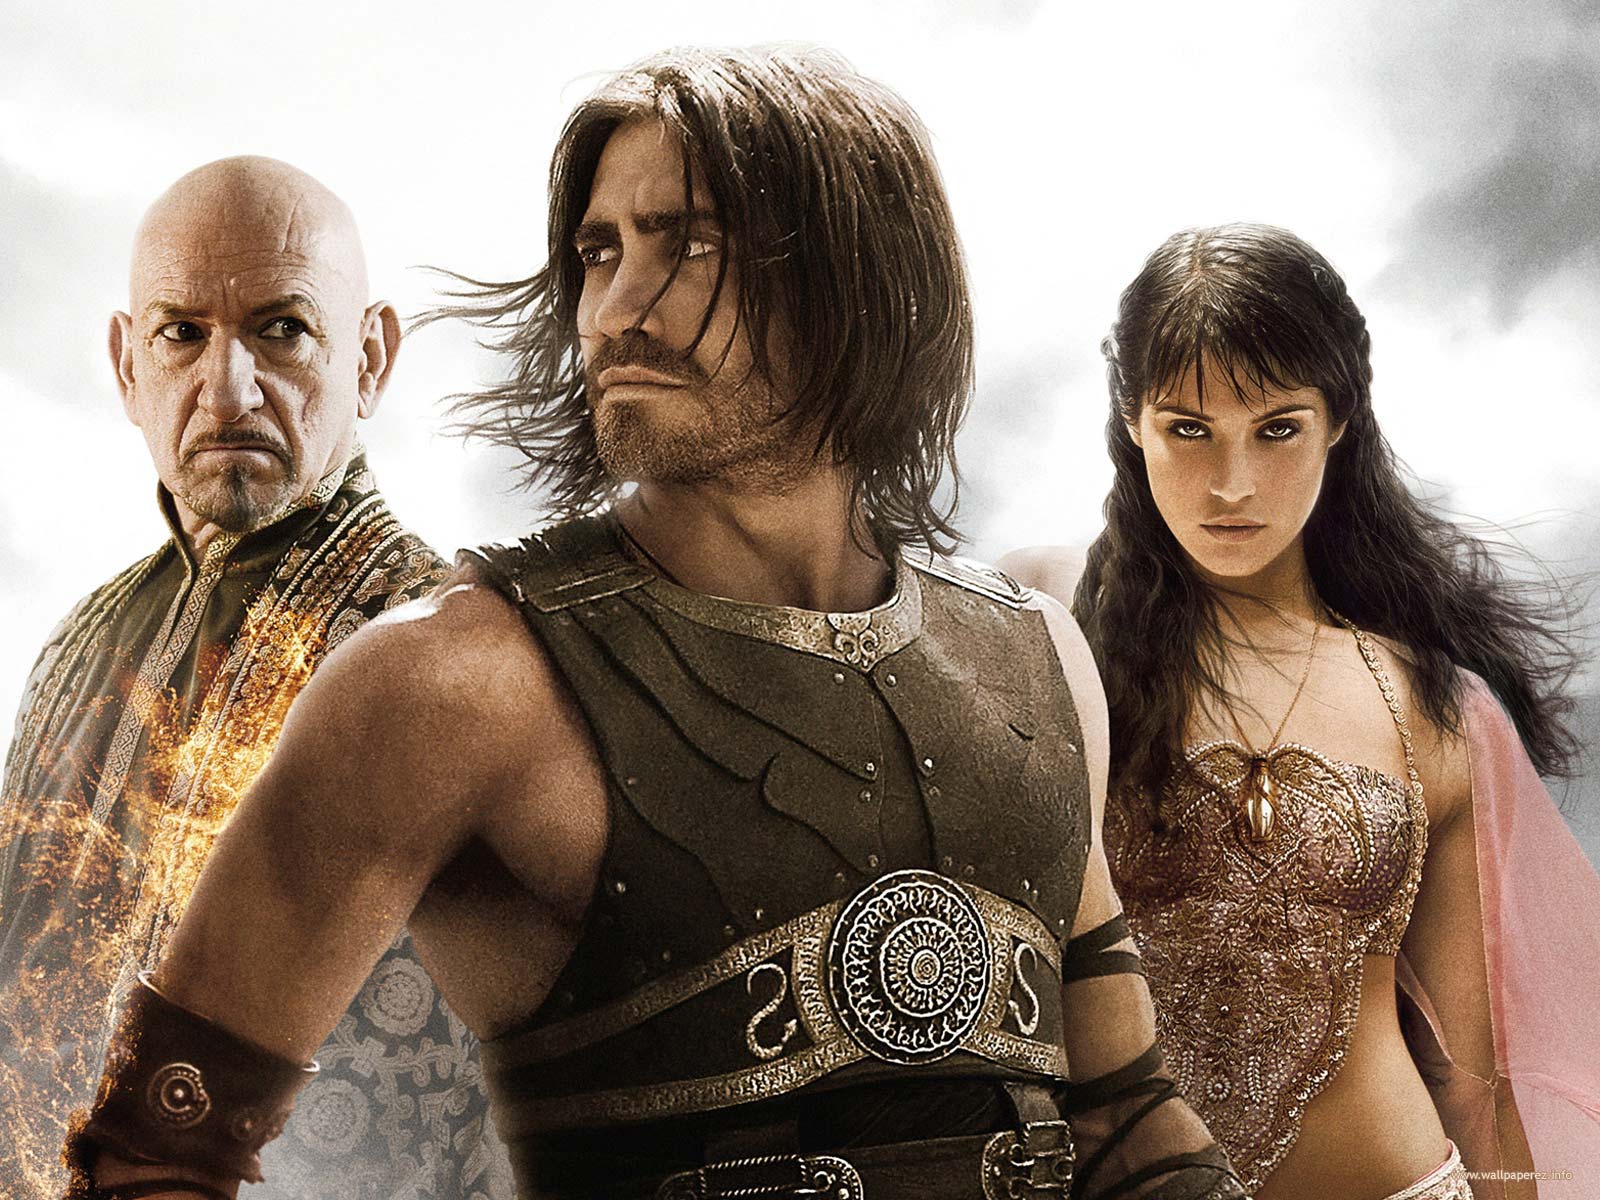 Prince of Persia: The Sands of Time movies in Latvia